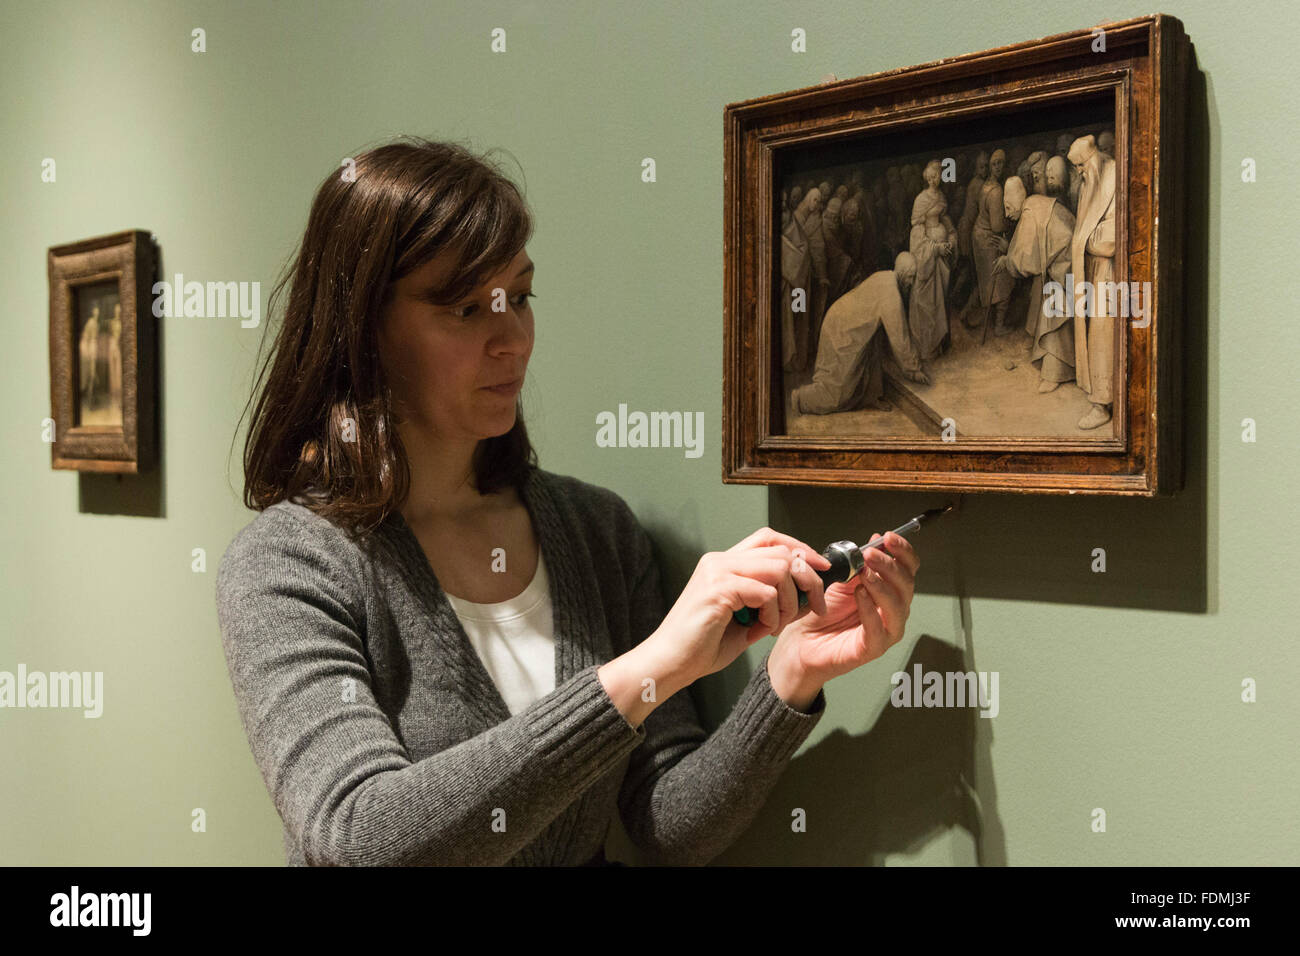 London, UK. 1 February 2016. A Courtauld Gallery employee holds the Bruegel painting Christ and the Woman Taken in Adultery, 1565. Bruegel in Black and White: Three Grisailles Reunited at The Courtauld Gallery. From 4 February to 8 May 2016 Pieter Bruegel the Elder’s three surviving grisaille paintings will be shown together for the first time at The Courtauld Gallery. The three panels will be accompanied by comparative prints and contemporary replicas, alongside other independent grisailles to examine their legacy and the development of this genre in Northern Europe. Stock Photo